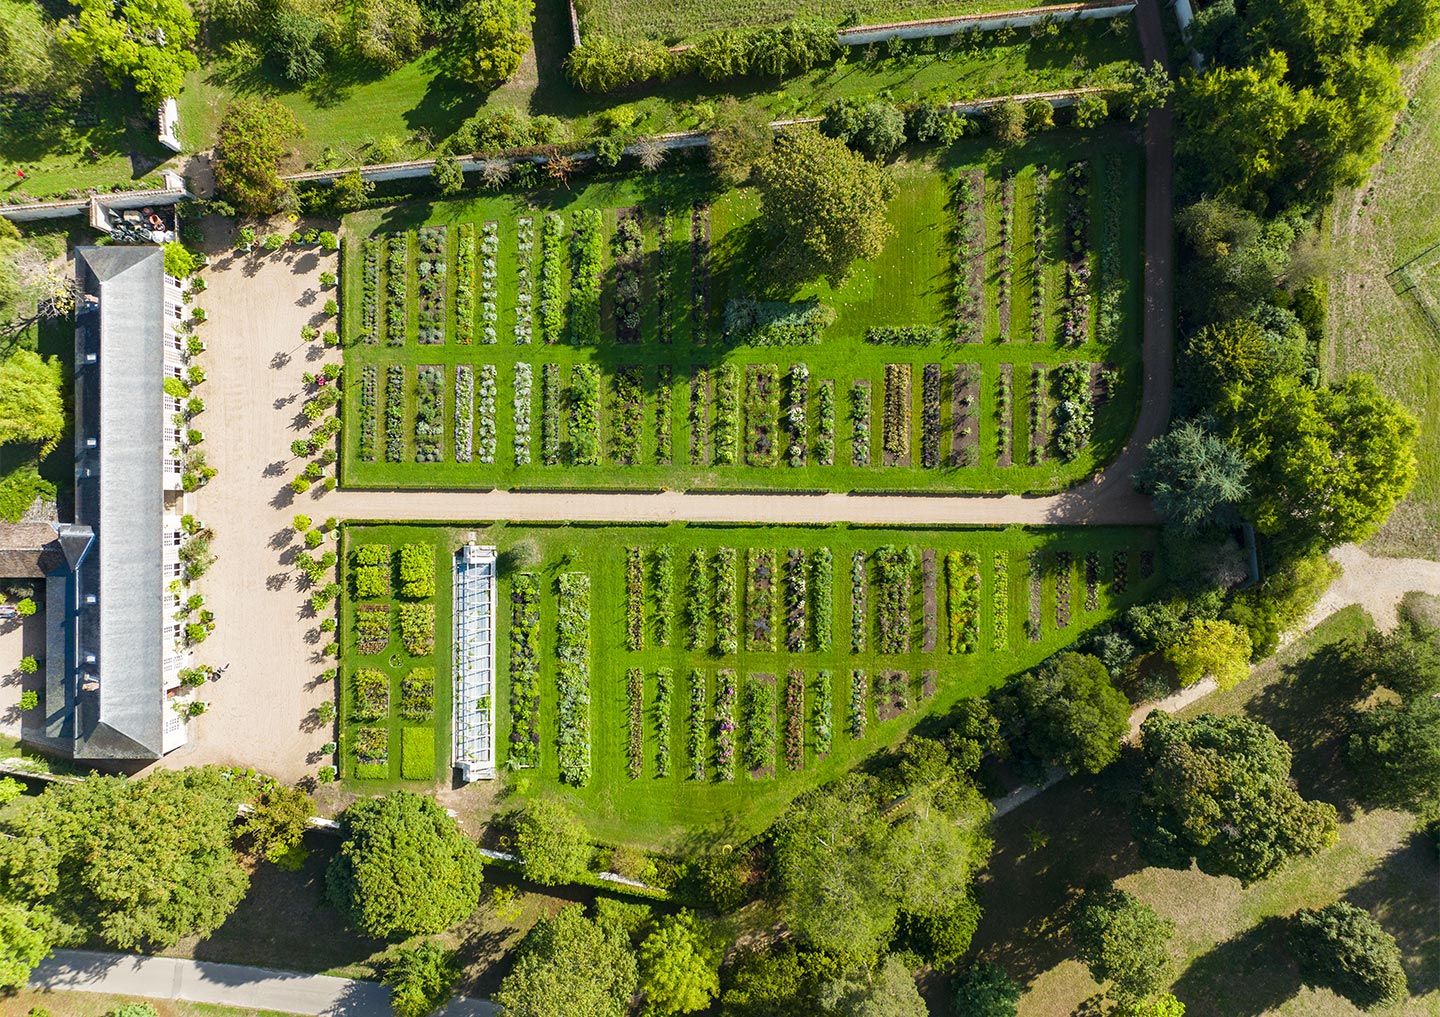 Aerial view of the Châteauneuf Orangery © Palace of Versailles / T. Garnier